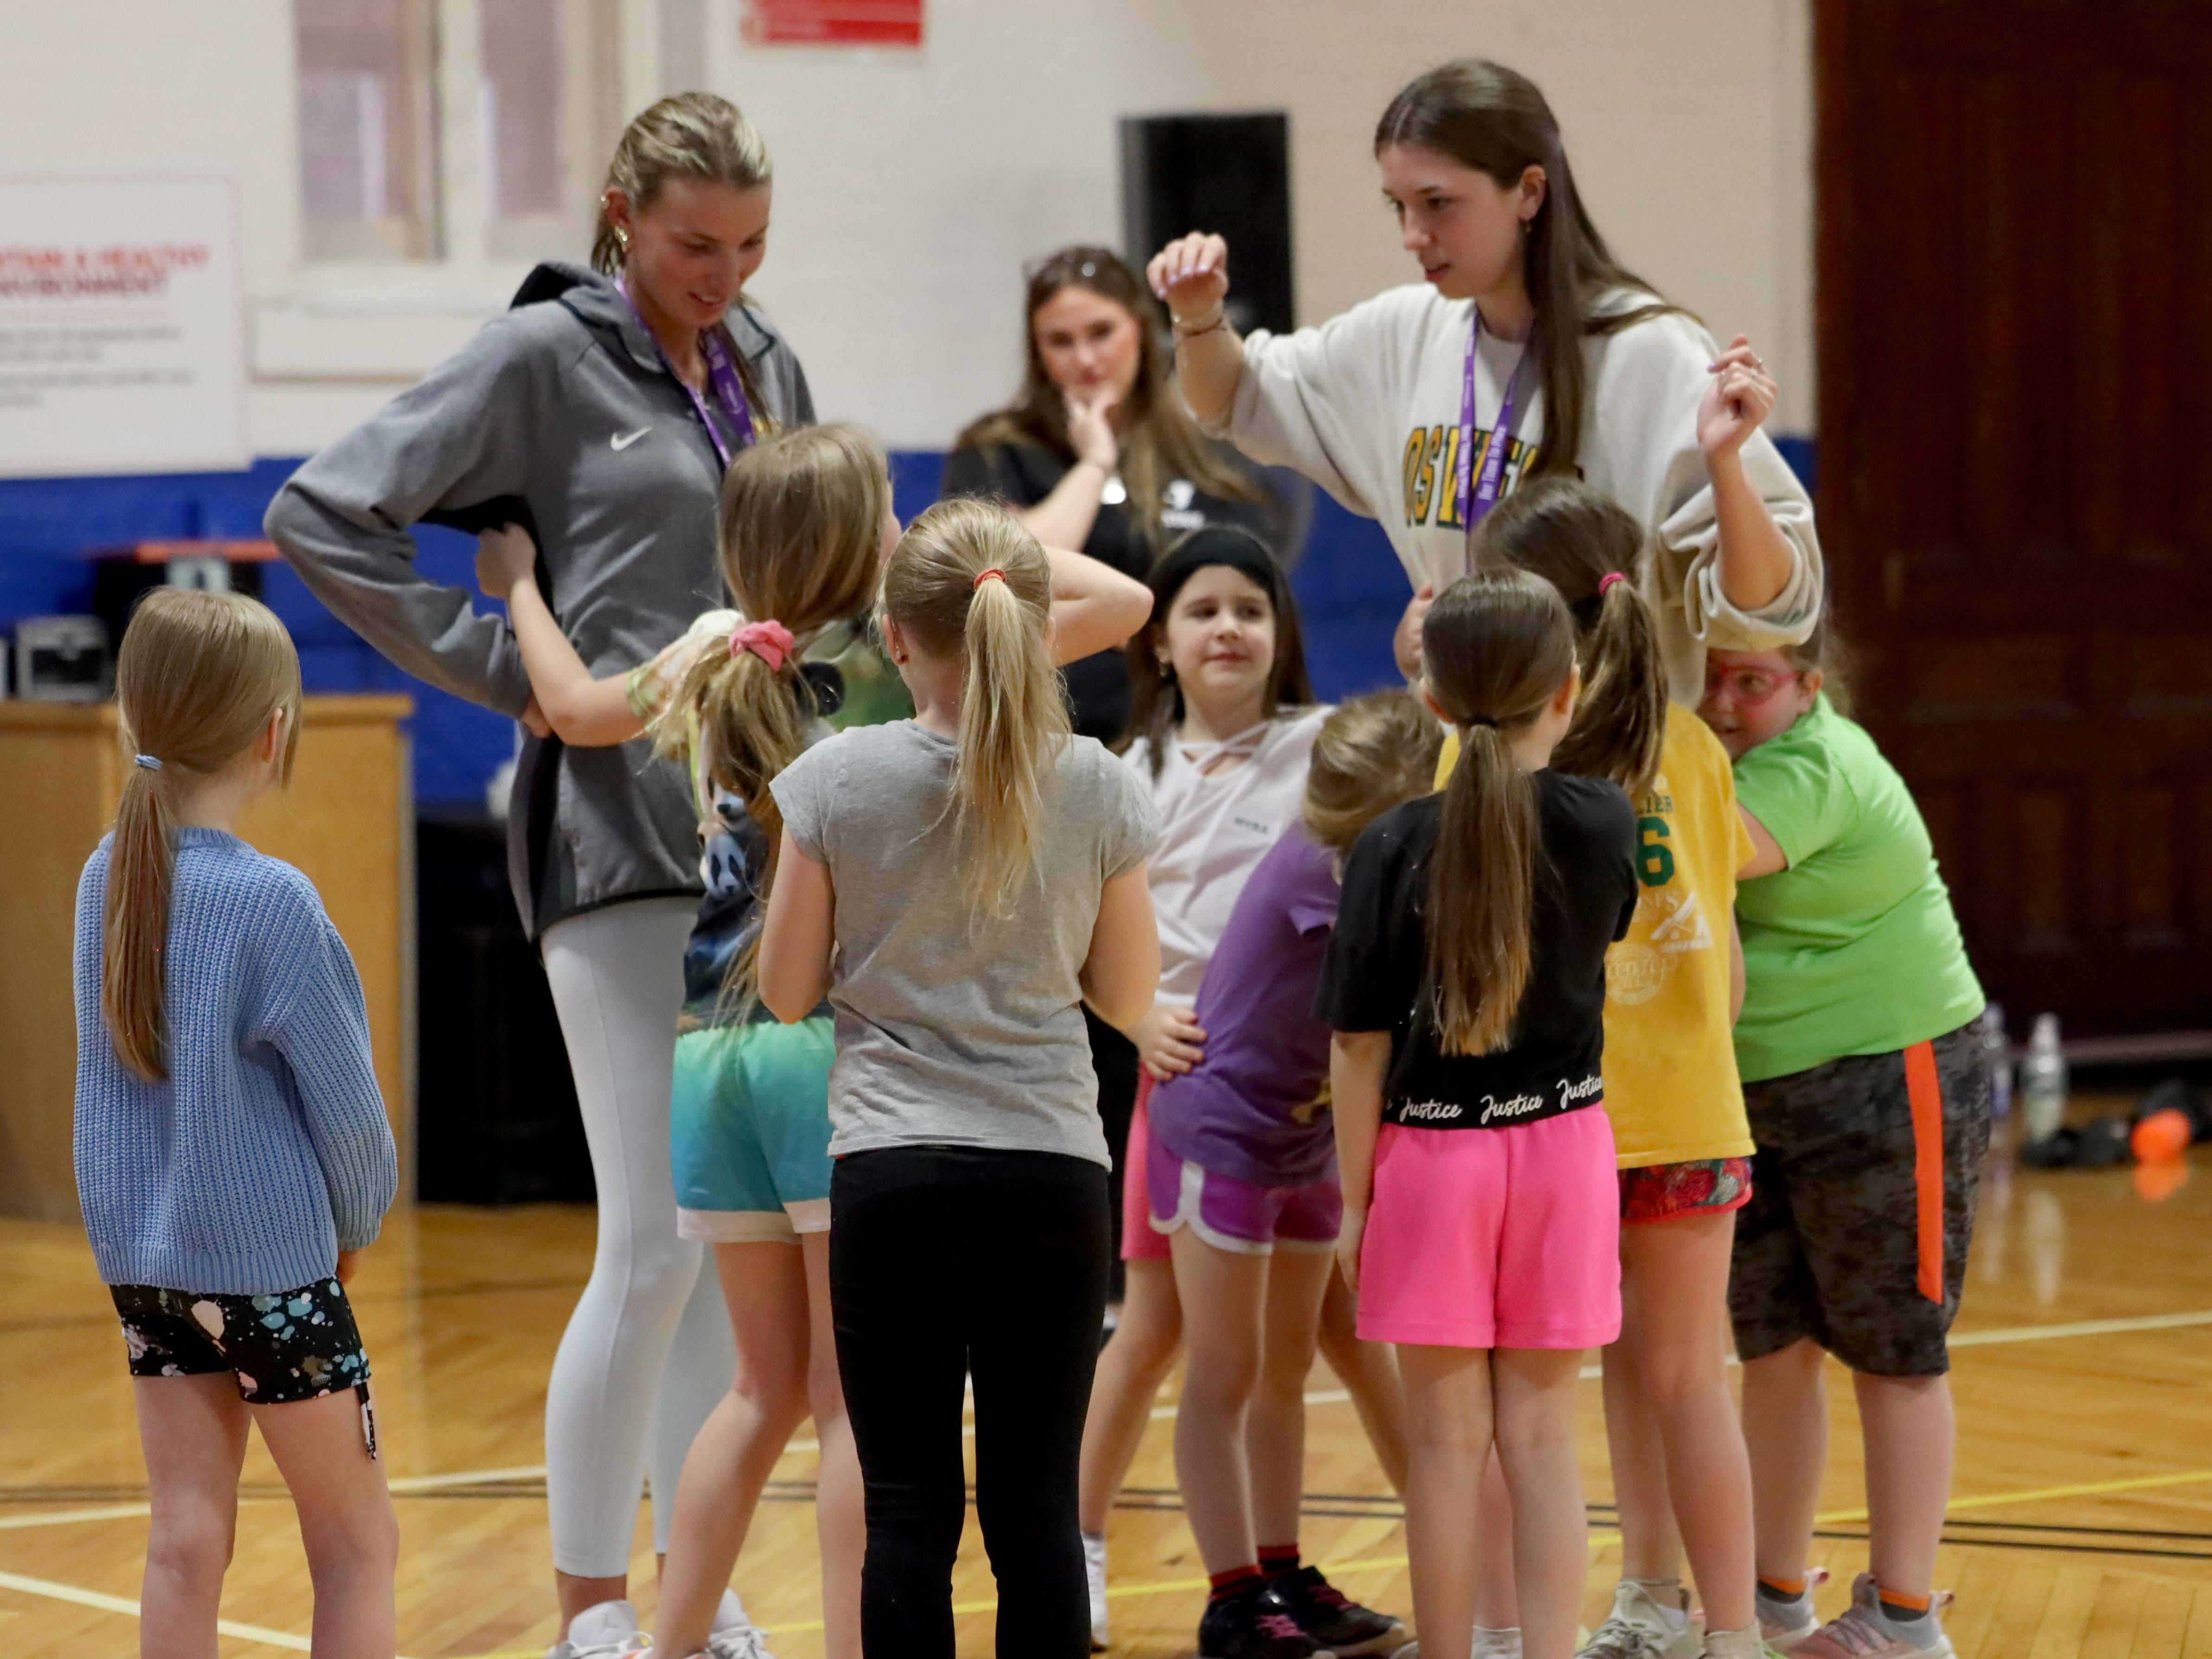 Two members of the Laker women's basketball team enjoy working with girls in the Her Time To Play program at the Oswego YMCA